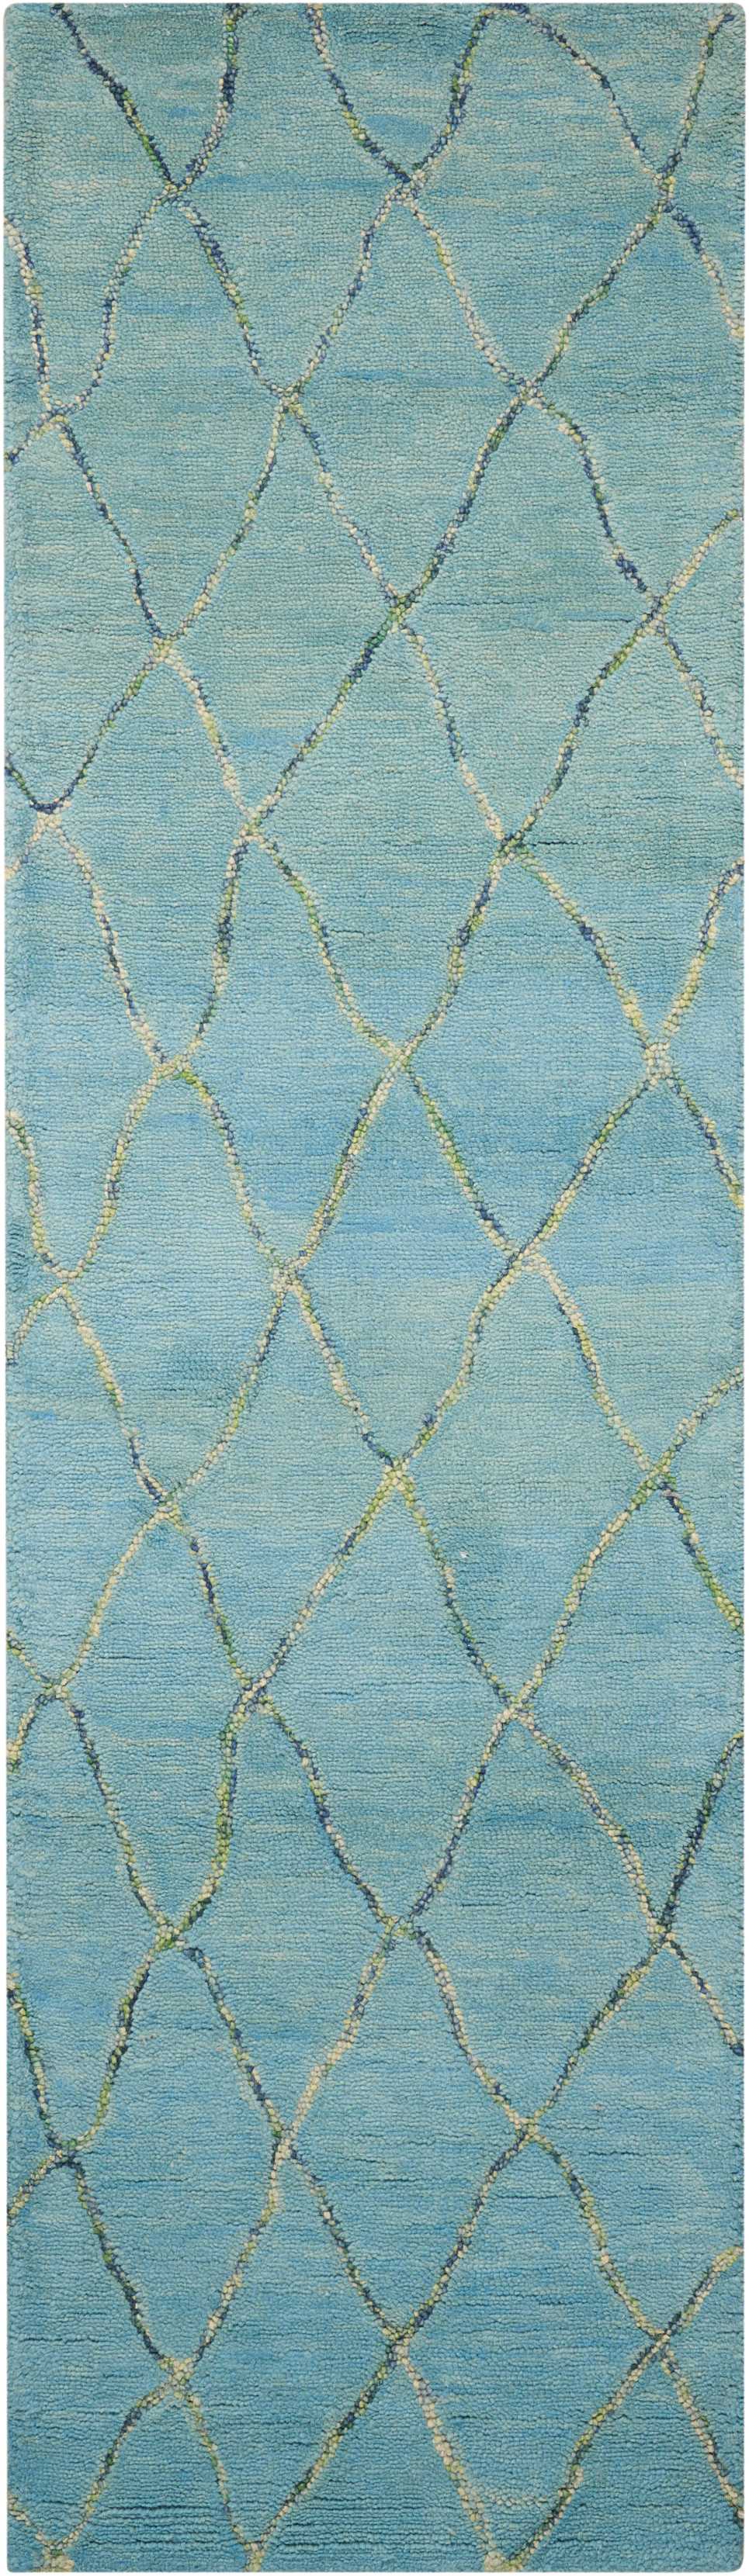 Barclay Butera Intermix Wave Area Rug by Nourison